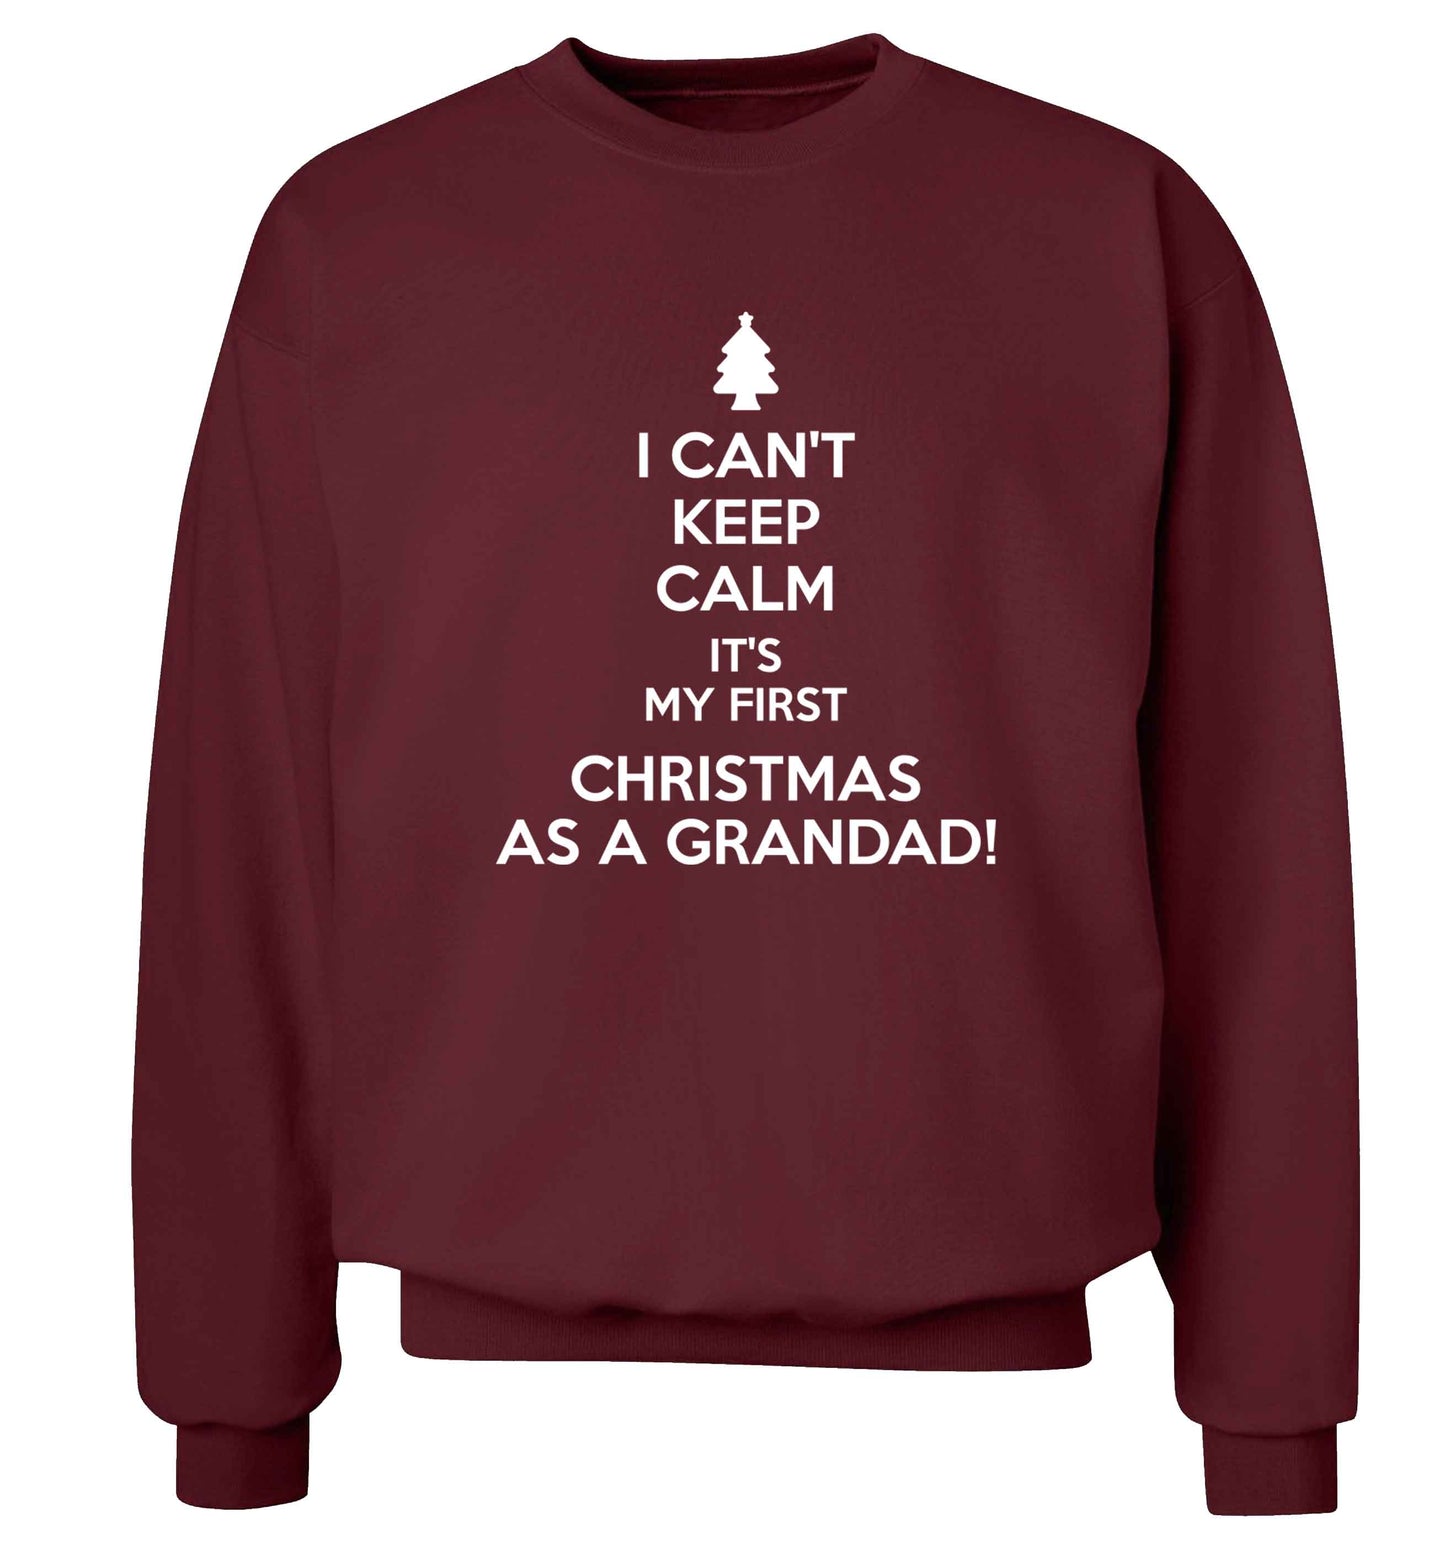 I can't keep calm it's my first Christmas as a grandad! Adult's unisex maroon Sweater 2XL